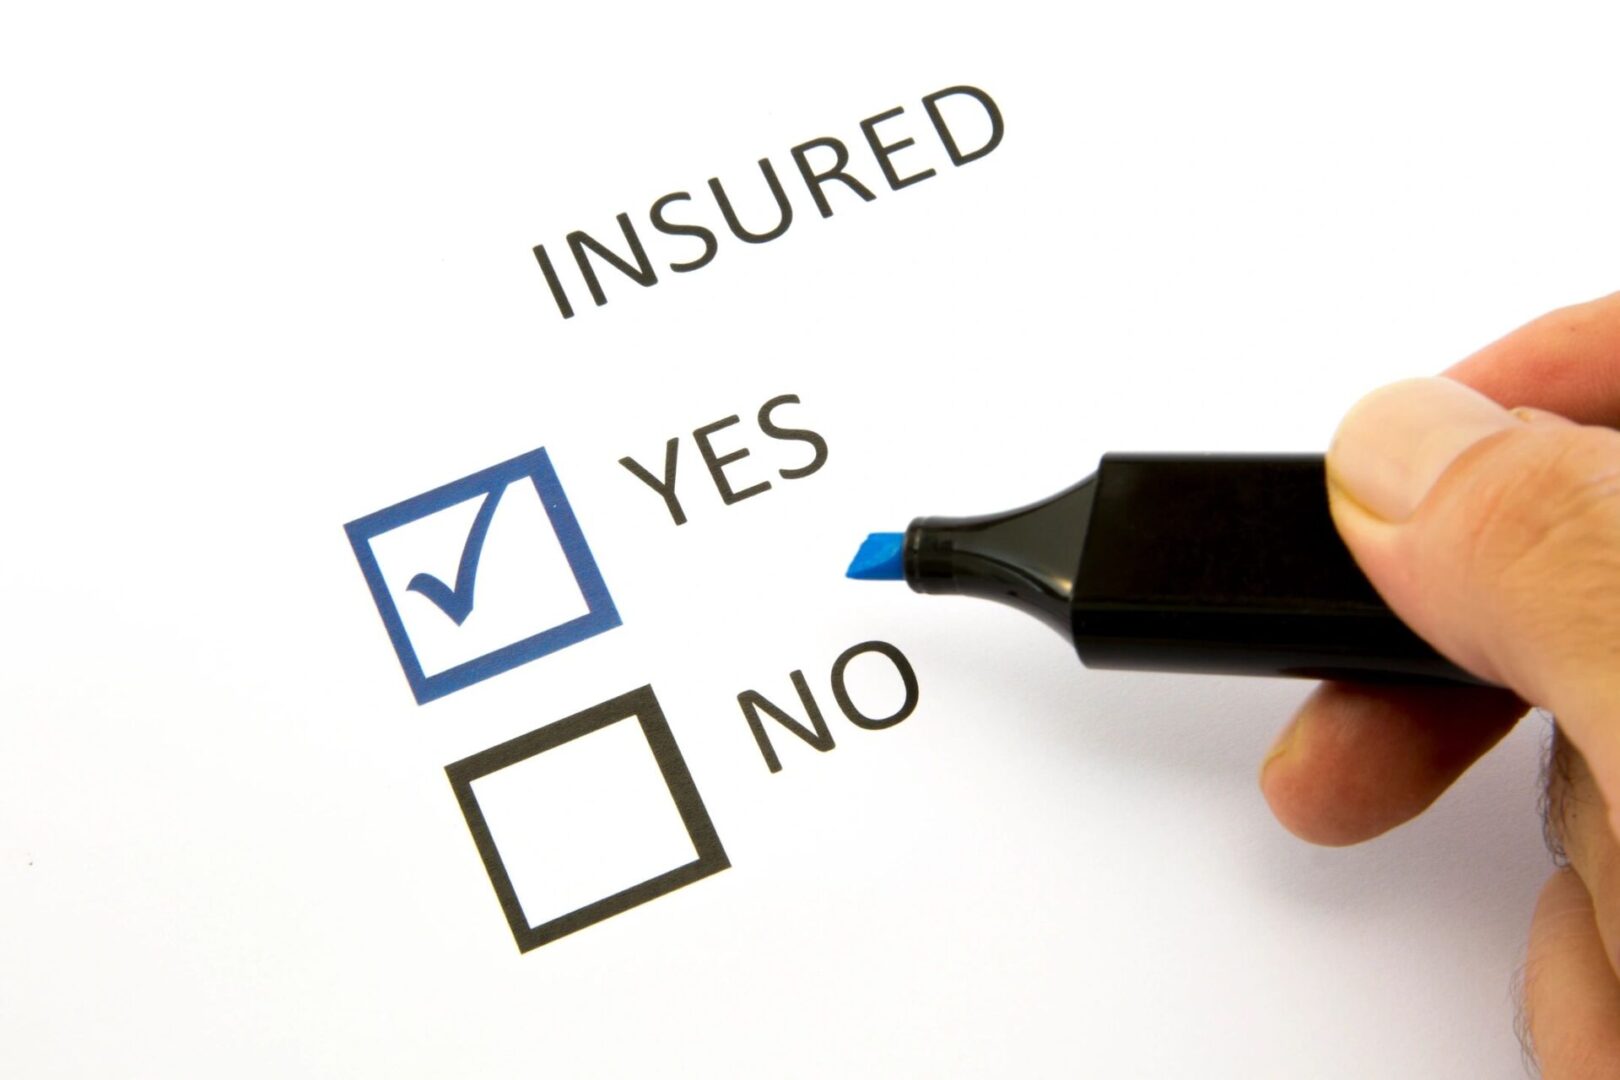 A person is filling out an insured questionnaire.